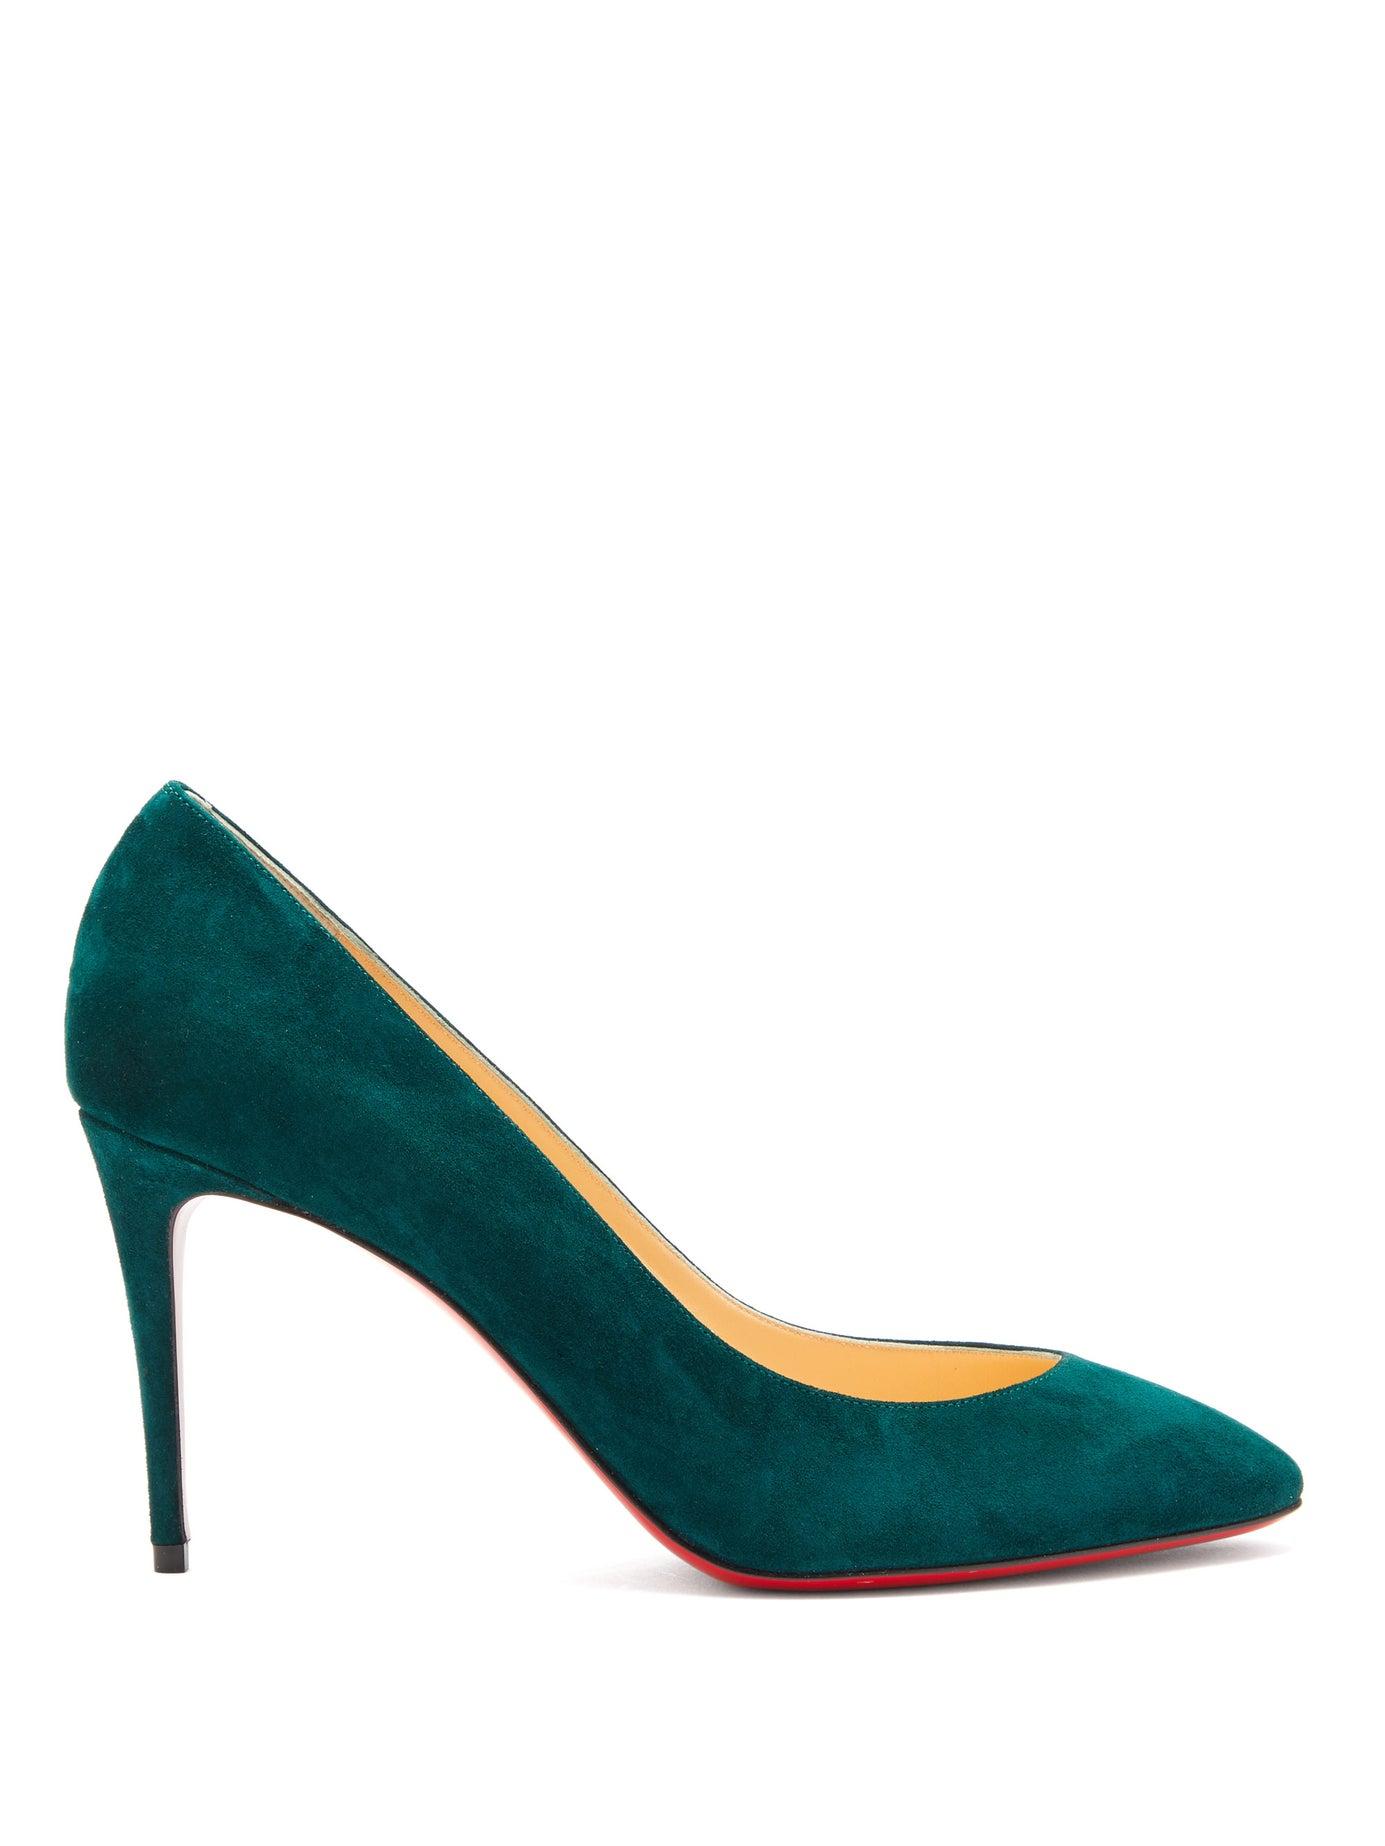 Christian Louboutin Eloise 85 Suede Pumps in Dark Green (Green) - Save ...